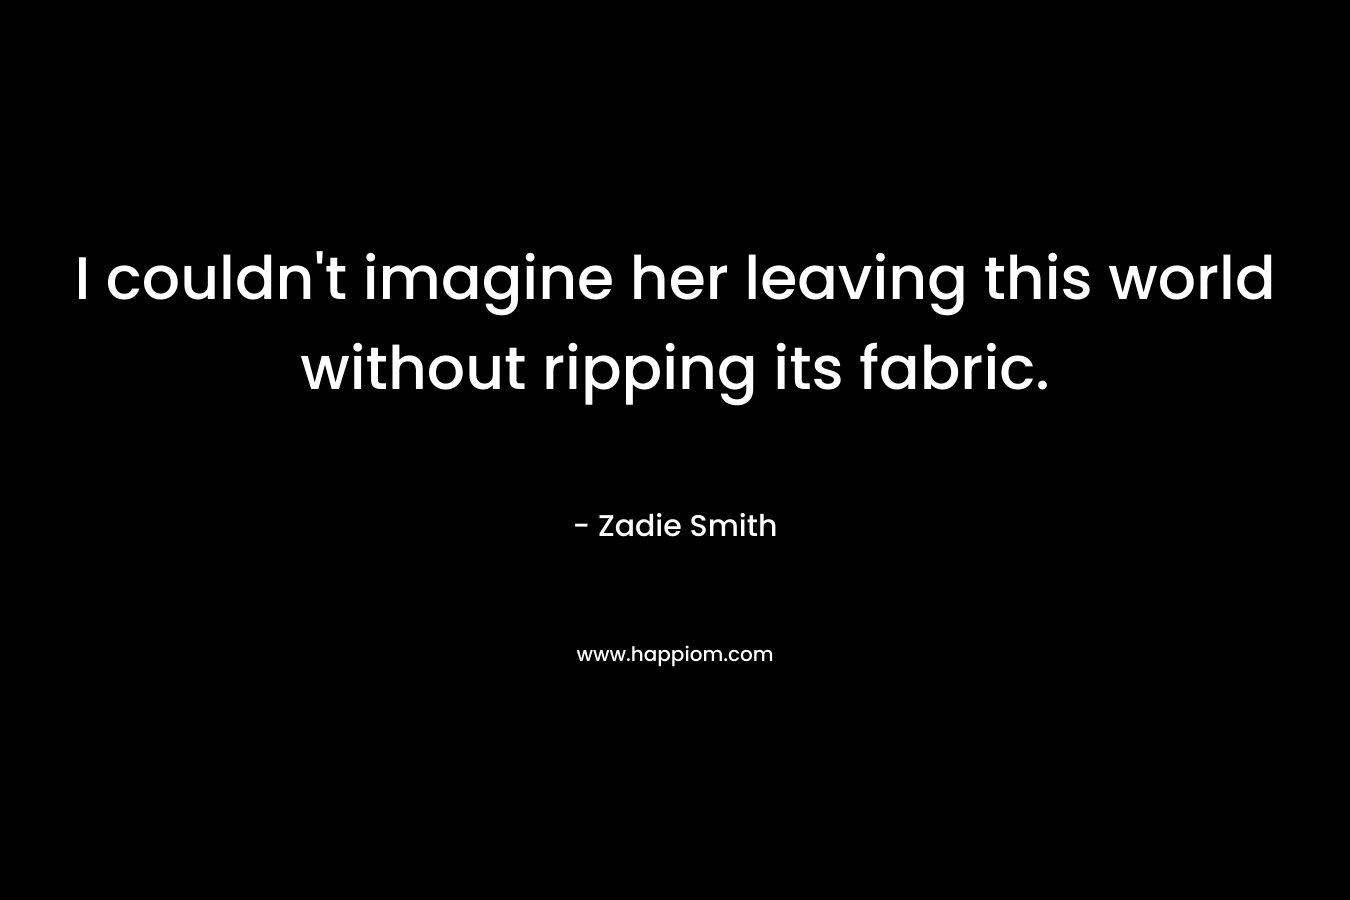 I couldn't imagine her leaving this world without ripping its fabric.